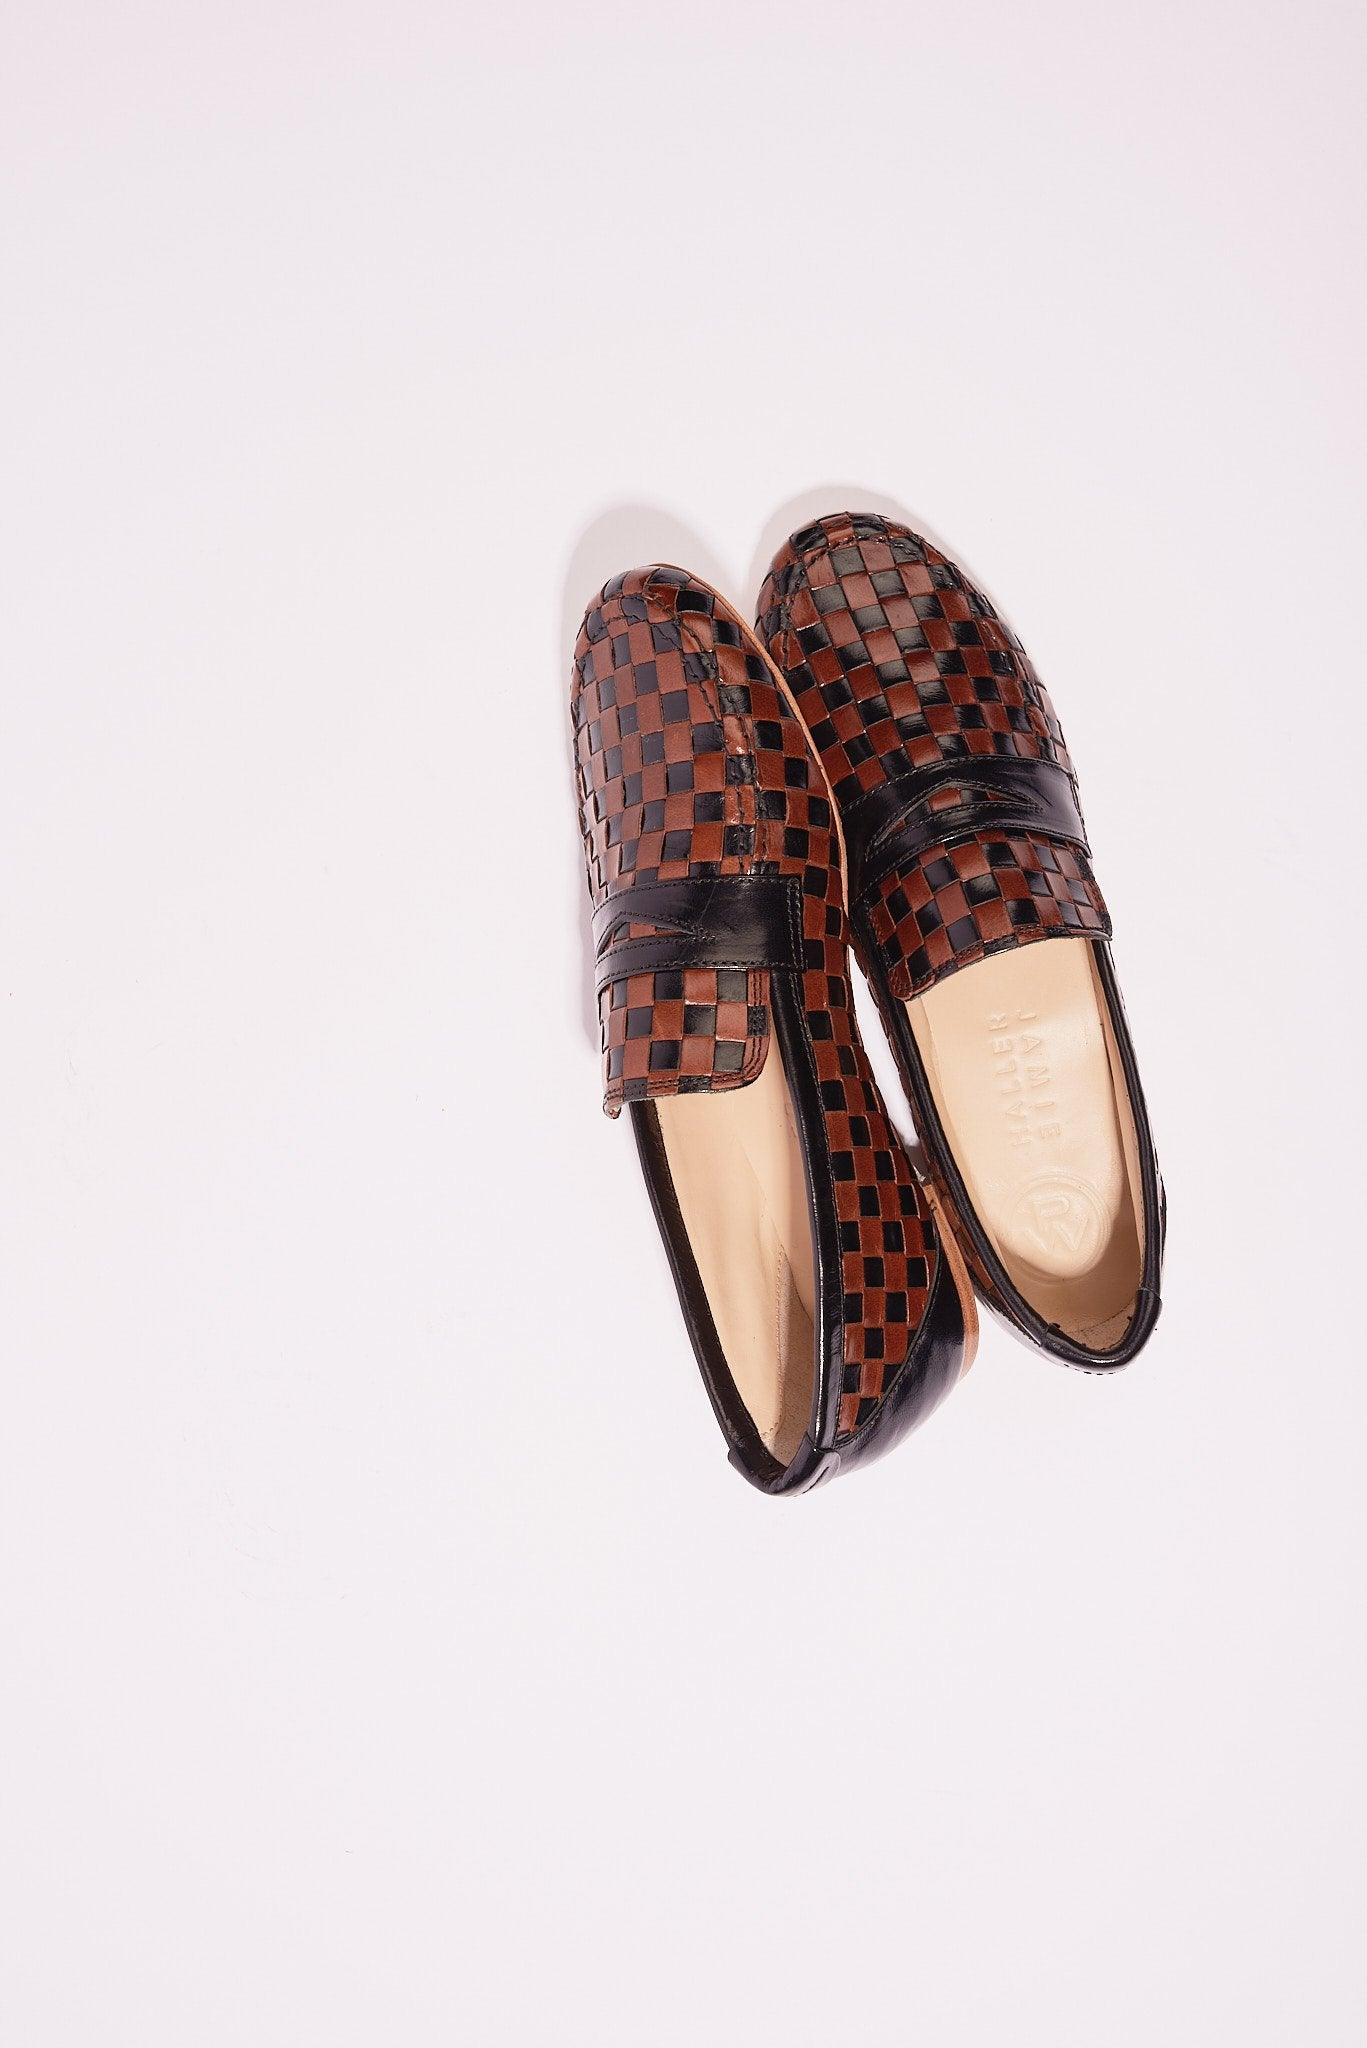 Black and Brown Woven Loafer Flat View on Angle 2